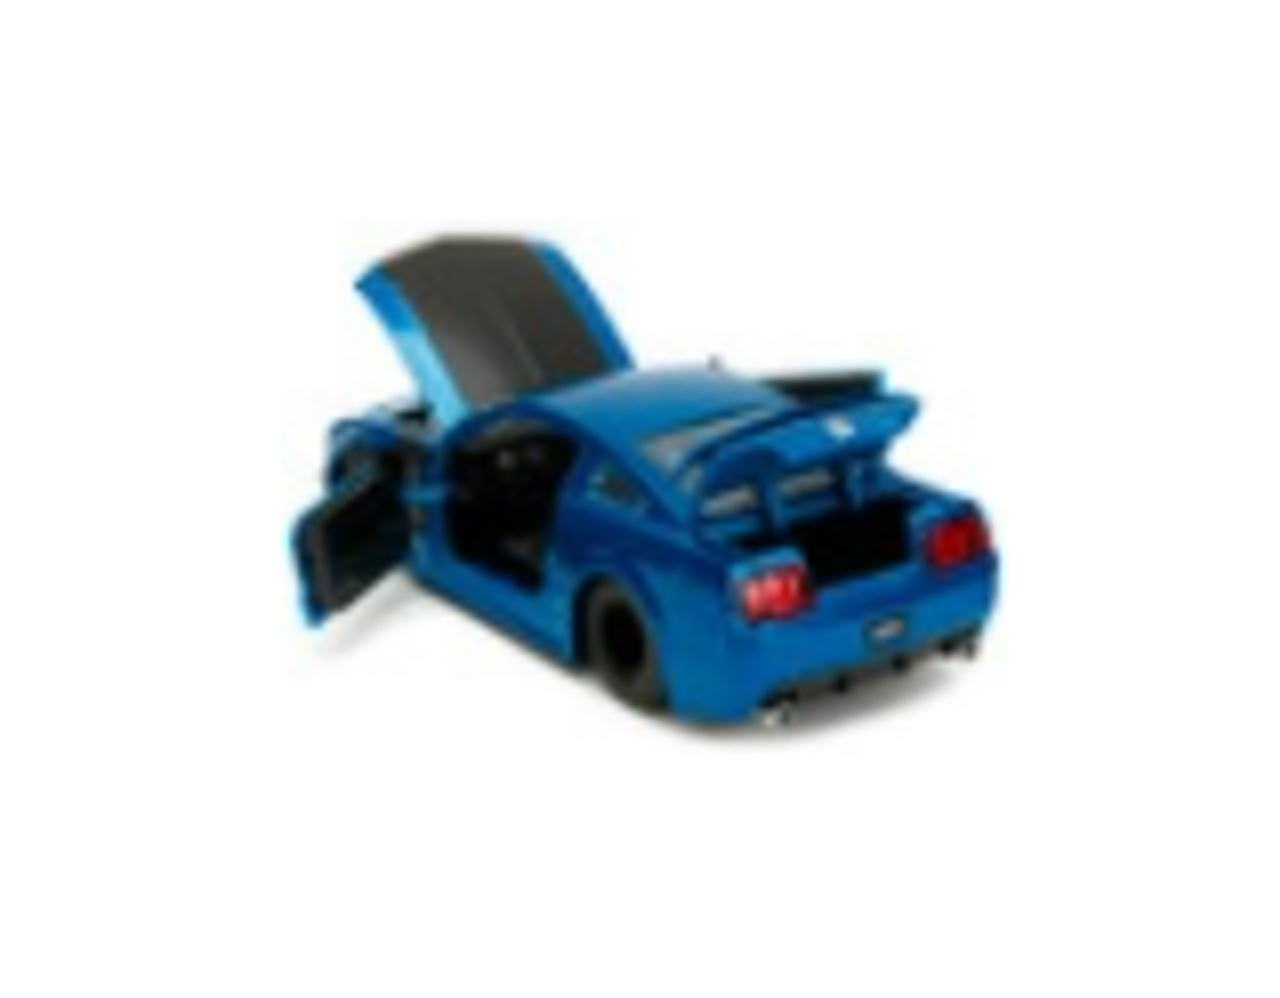 2006 Ford Mustang GT Blue Metallic with Matt Black Hood and Stripes "Bigtime Muscle" Series 1/24 Diecast Model Car by Jada